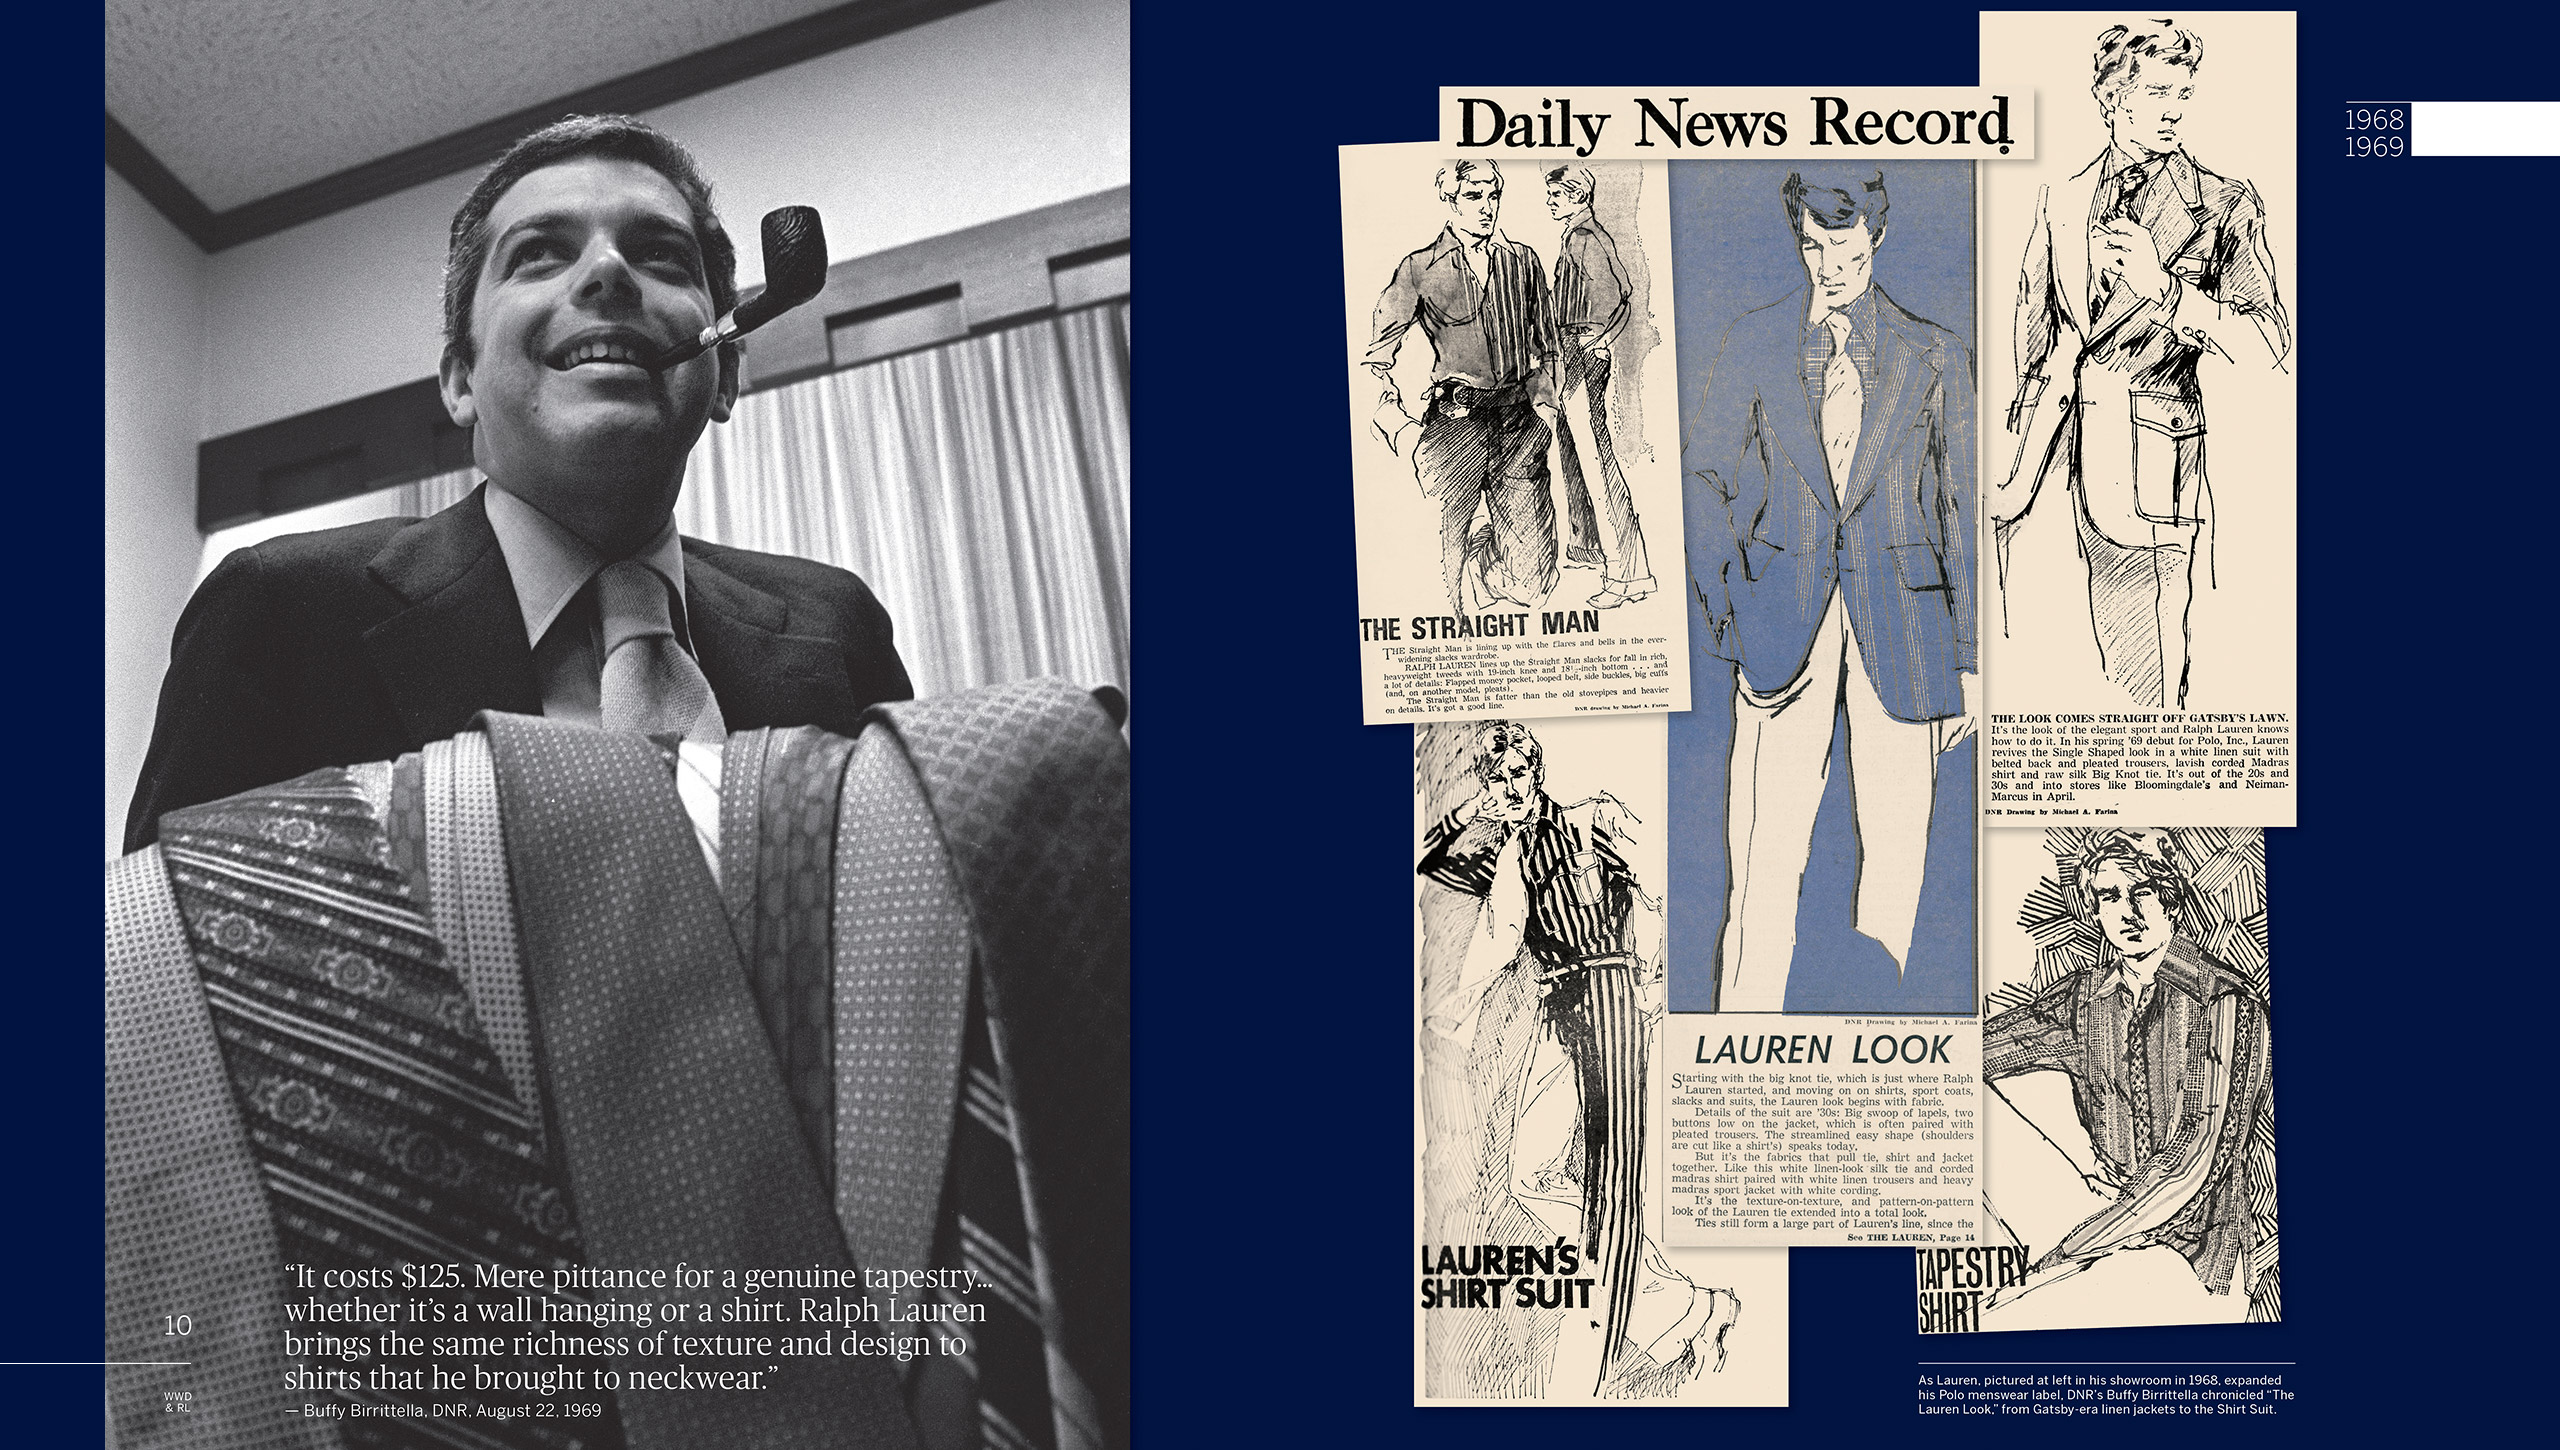 1968&#x2013;1969: Ralph Lauren strikes out on his own, with Polo, Inc. The stylish elegance of his tie collection expands into a full line of shirts, sport coats, slacks, and suits. While the rest of the country is in the throes of hippiedom, Mr. Lauren&#x2019;s sophisticated vision of all-American fashion is making inroads in New York, and people are taking notice. A particularly keen eye that notices belongs to a young <em>DNR</em> editor named Buffy Birrittella, who helps codify the &#x201C;Lauren Look&#x201D; for her readers, calling Mr. Lauren&#x2019;s white linen belted-back suit &#x201C;a look straight off Gatsby&#x2019;s lawn.&#x201D;